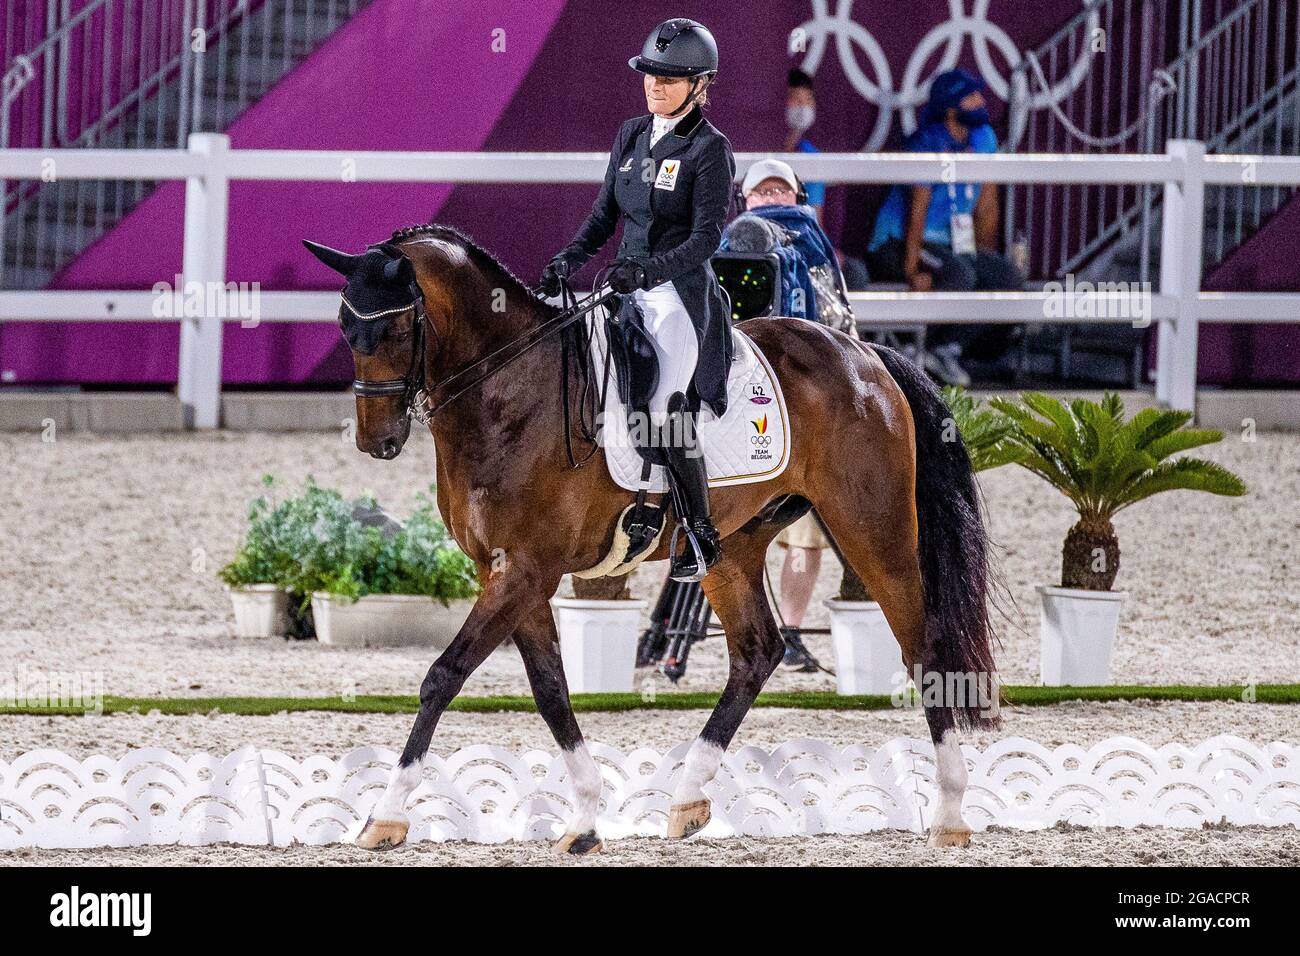 Belgian Equestrian jumping rider Lara De Liedekerke De Pailhe and her horse Alpaga d Arville pictured in action during the dressage event of the Event Stock Photo